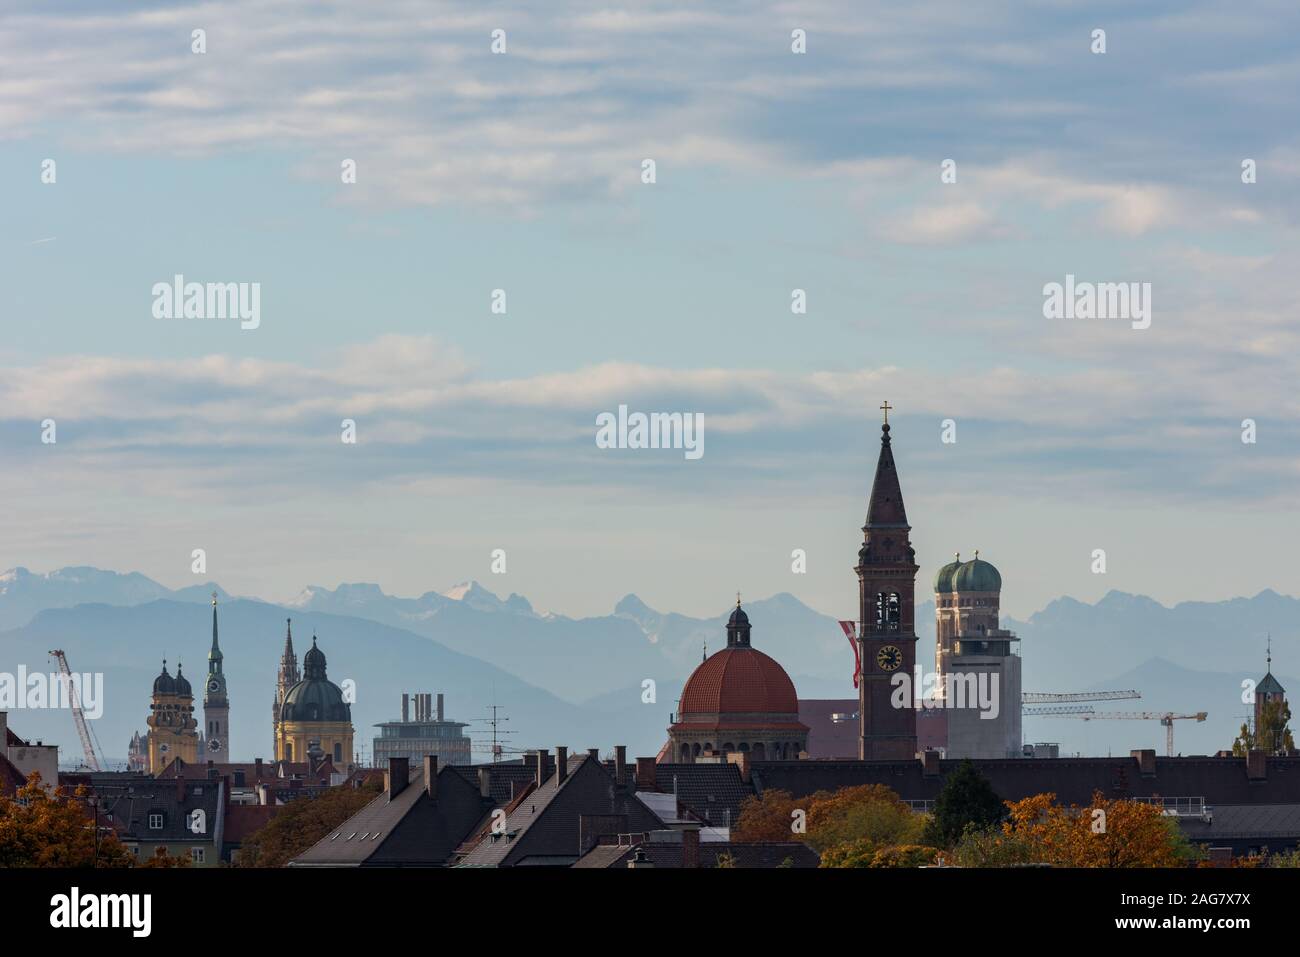 Rooftop view of churches in Munich with alpine mountains in the background Stock Photo